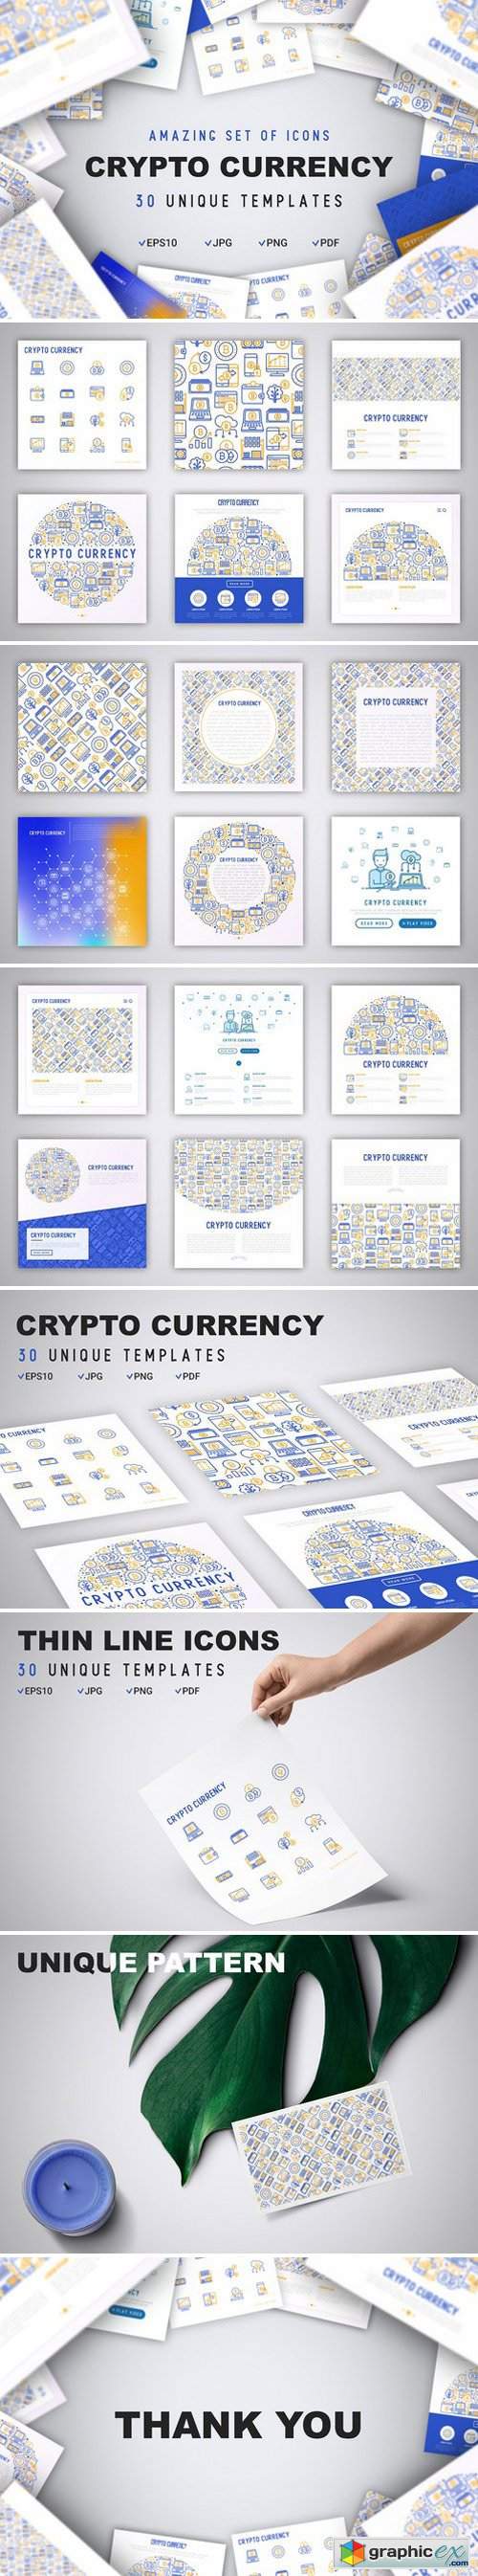 Crypto Currency Icons Set | Concept